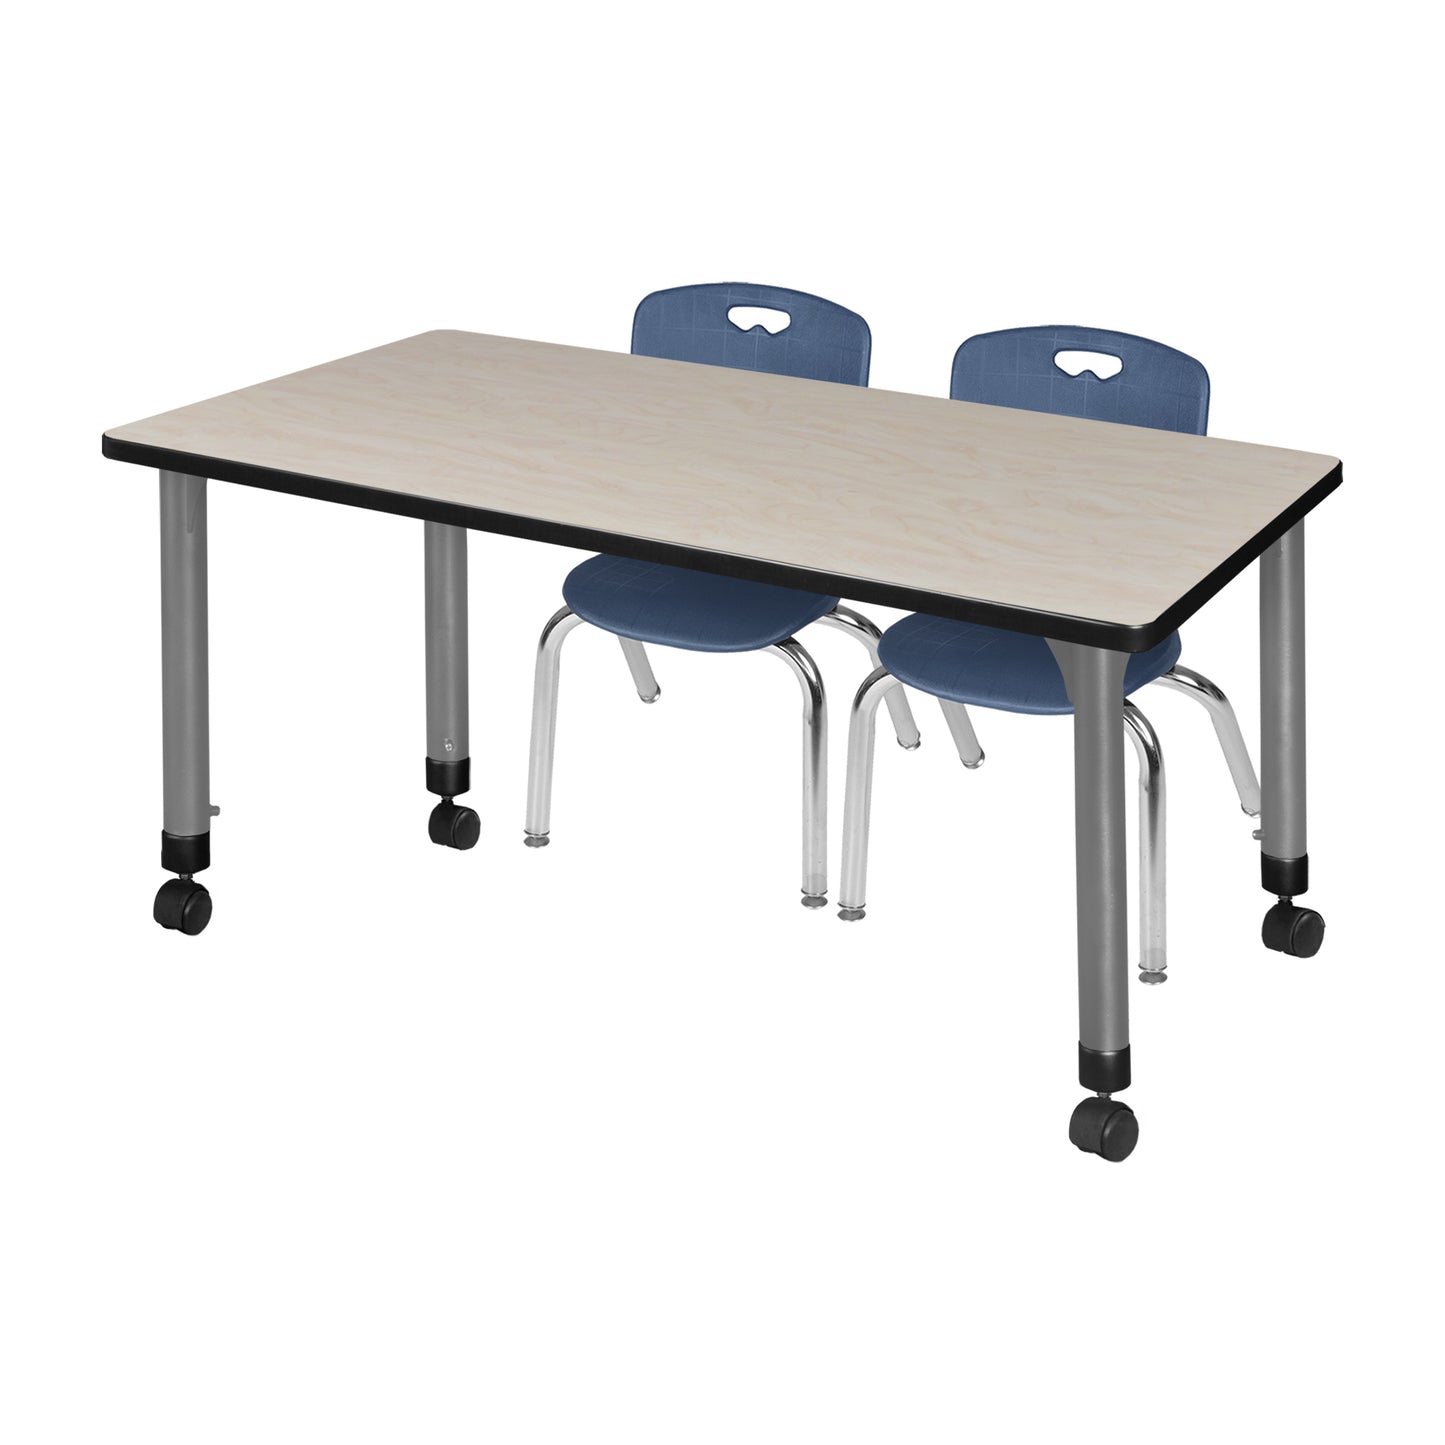 Regency Kee 72 x 24 in. Adjustable Classroom Table & 2 Andy 12 in. Stack Chairs